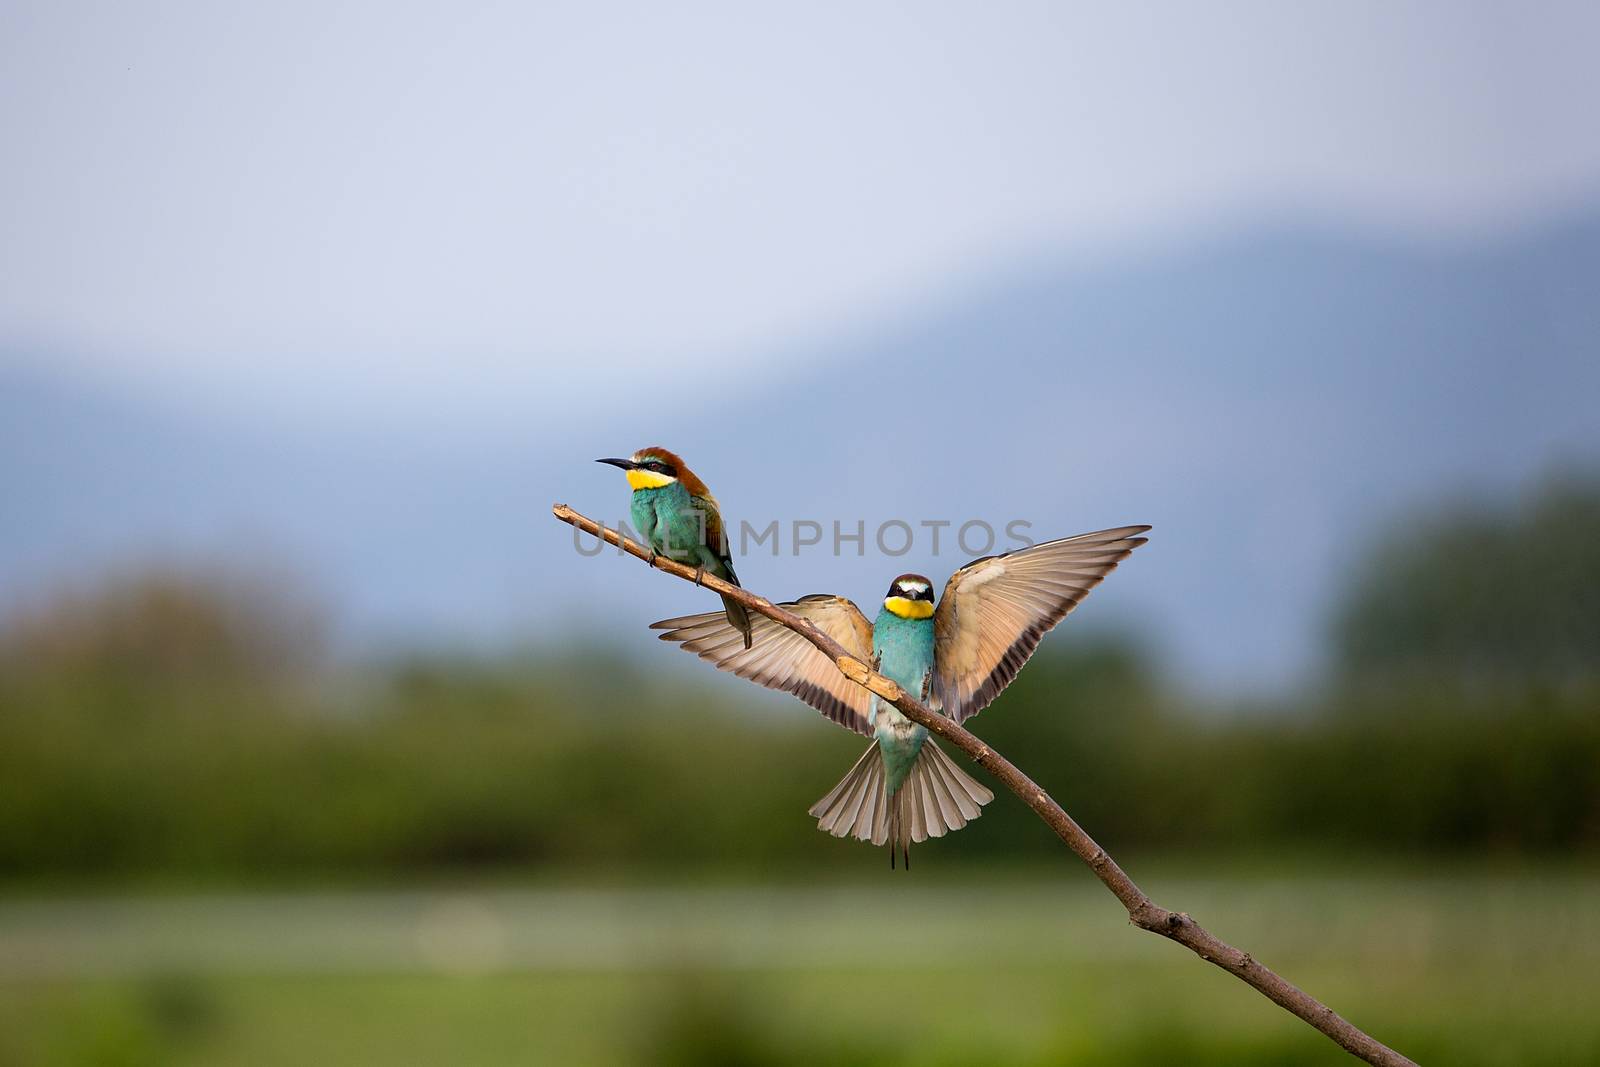 European Bee-eater couple (Merops apiaster) flying on brunch by Tanja_g